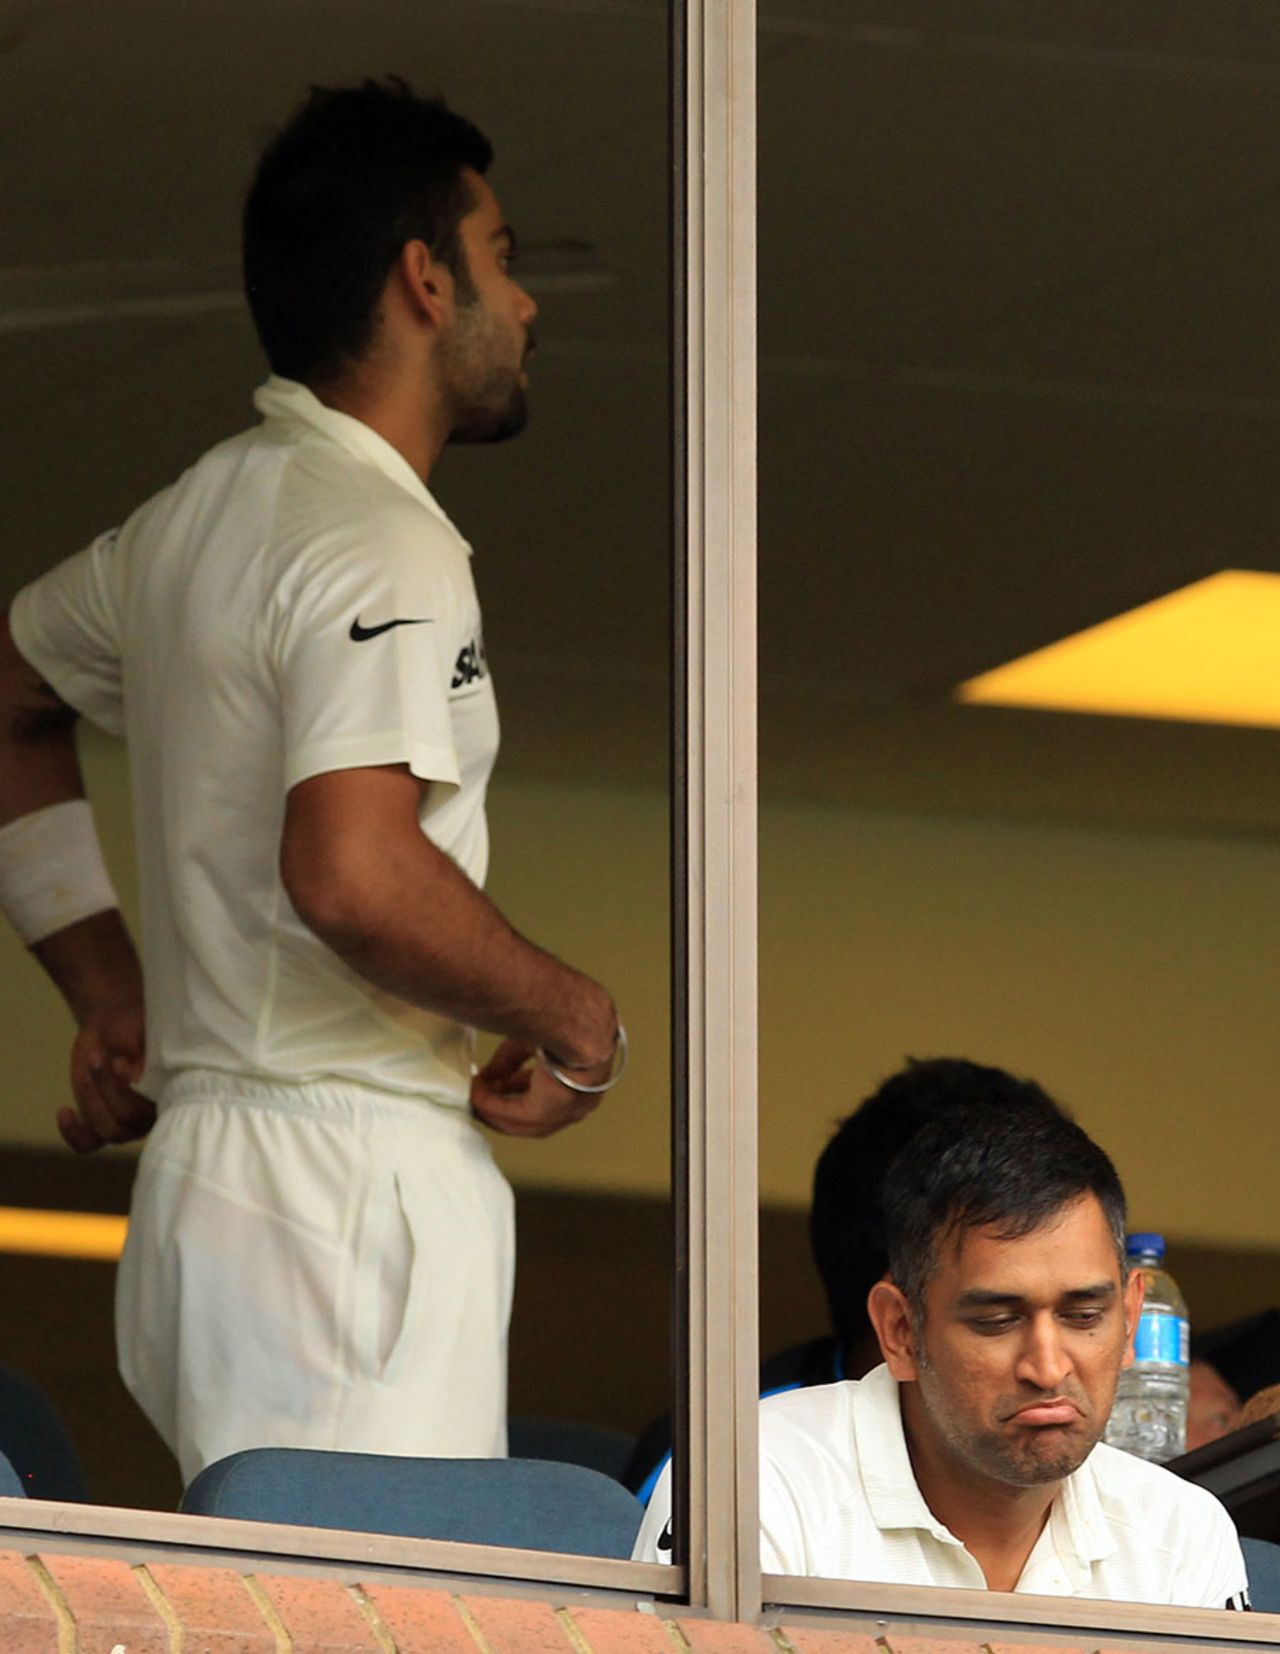 MS Dhoni is in a relaxed mood as play is held up by bad light, South Africa v India, 2nd Test, Durban, 1st day, December 26, 2013